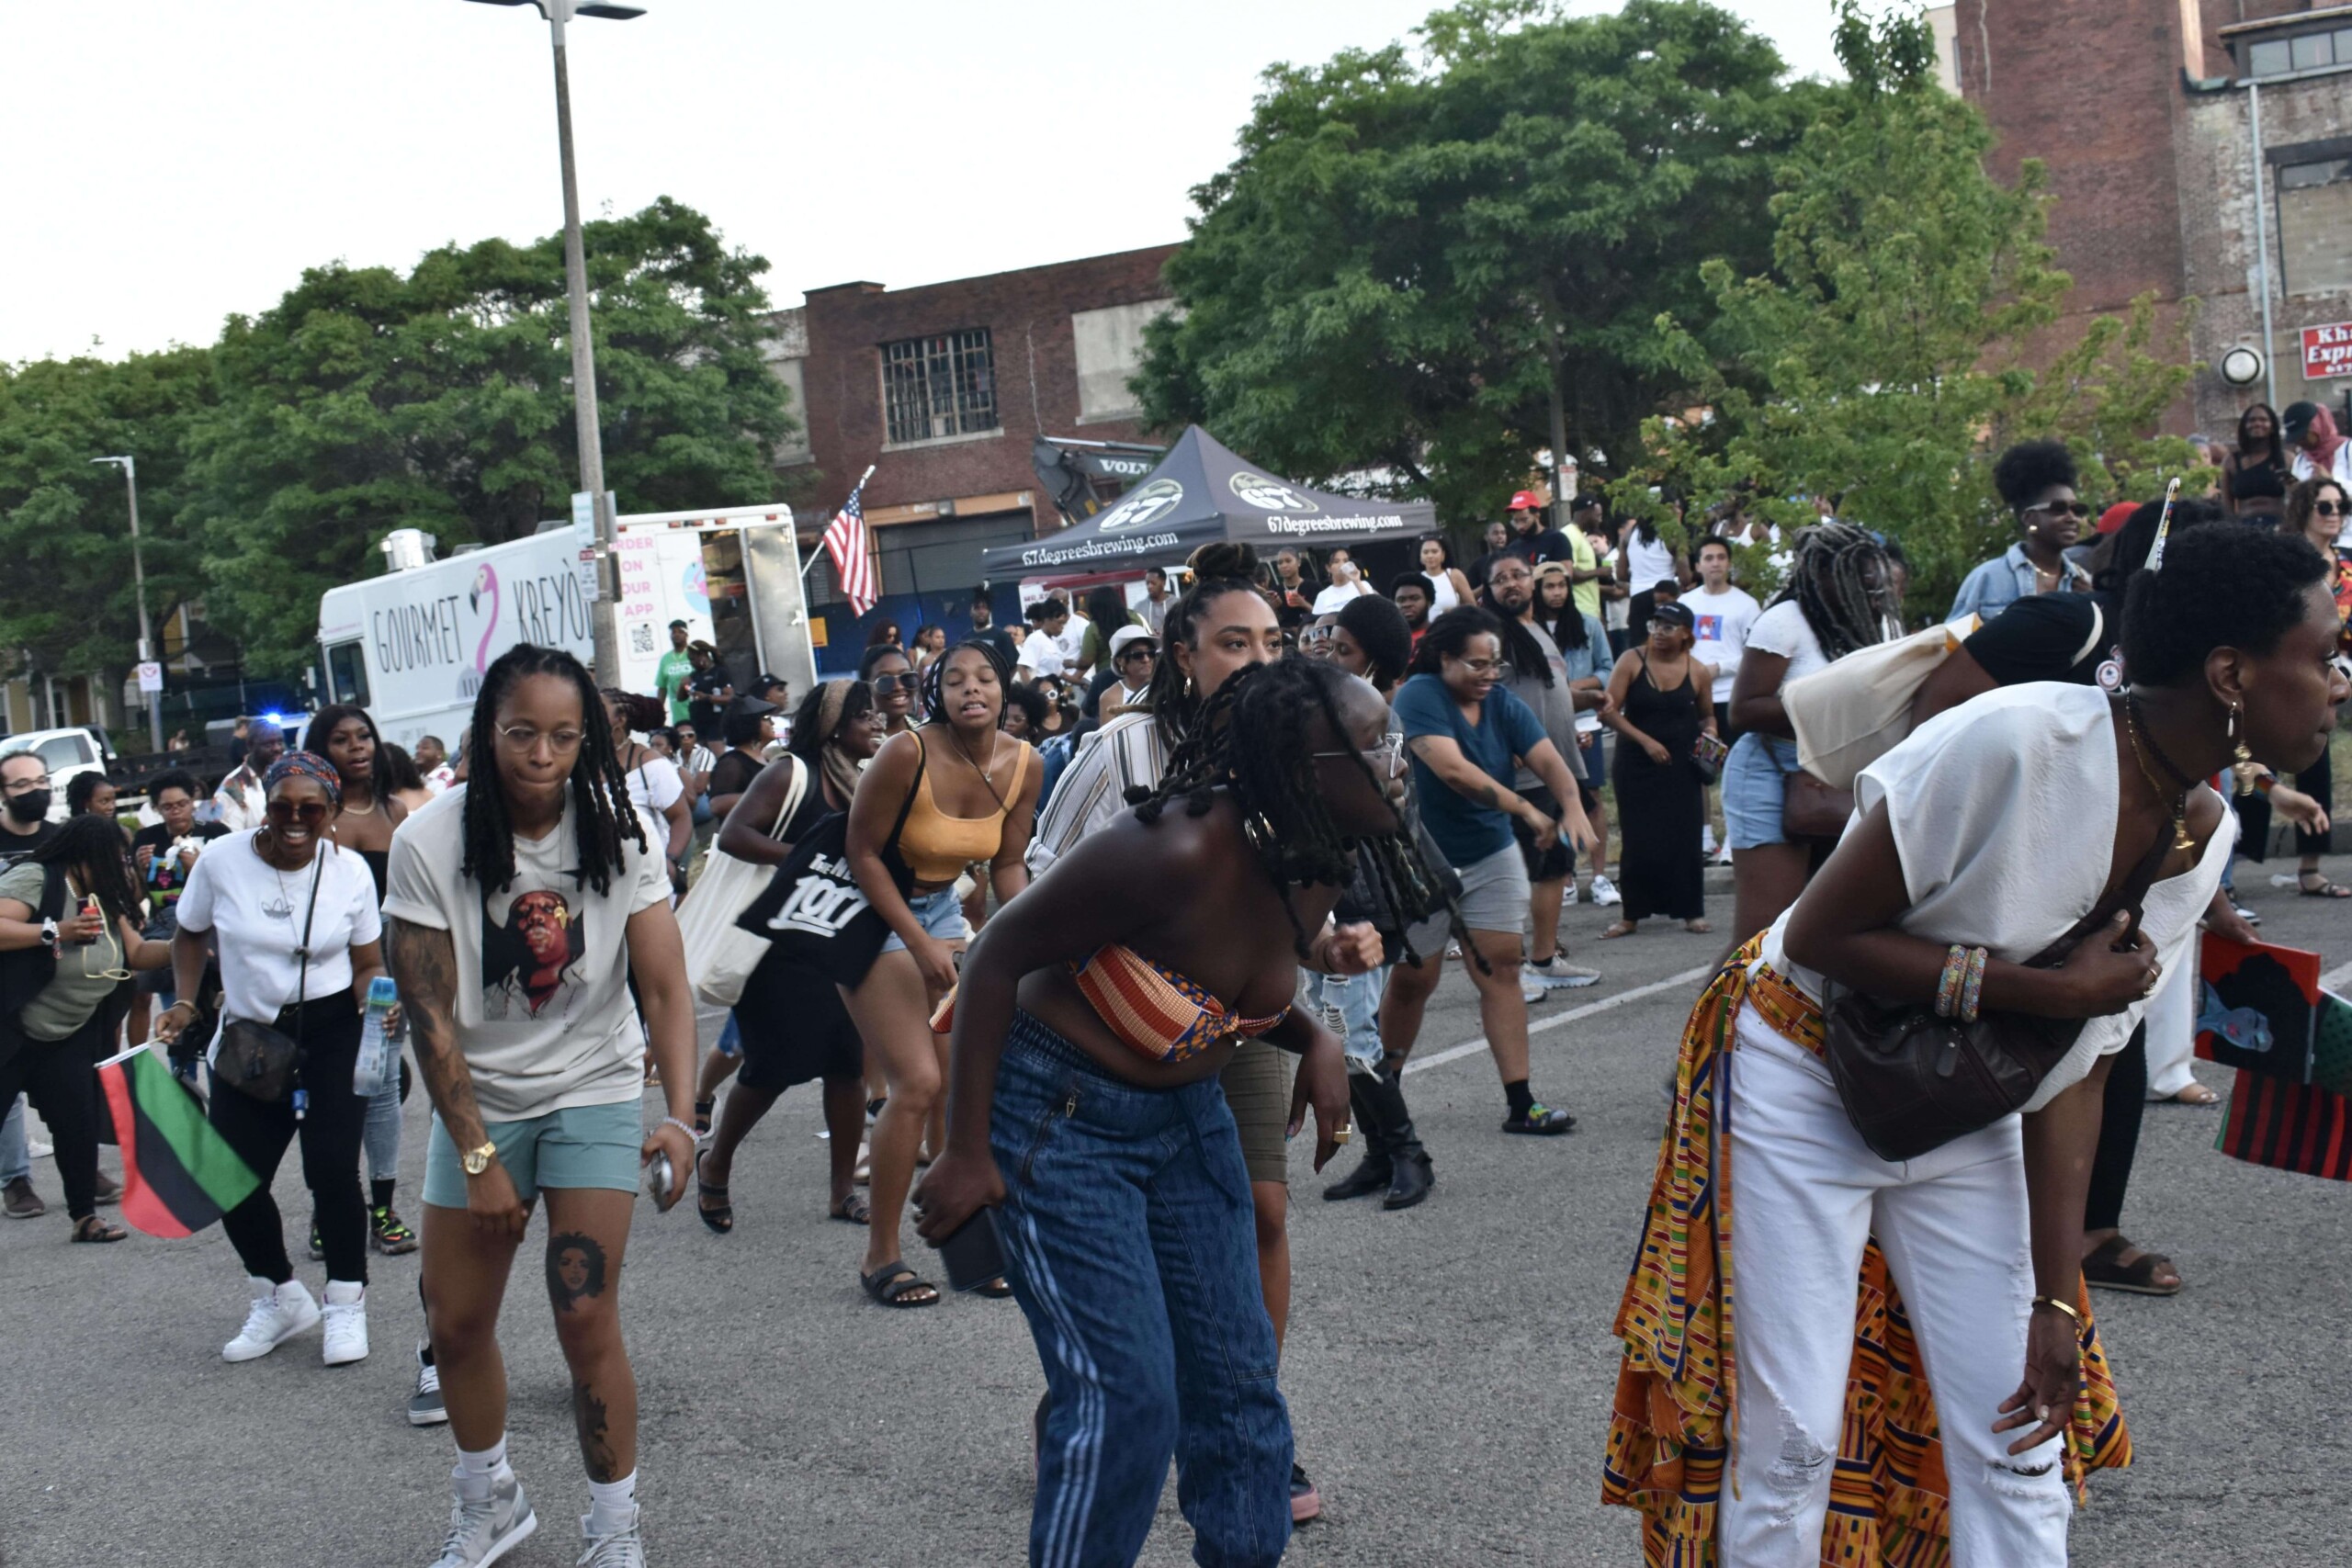 Roxbury Community dancing at the Juneteenth block party in Nubian Square - King Boston Embrace Ideas Festival 2022